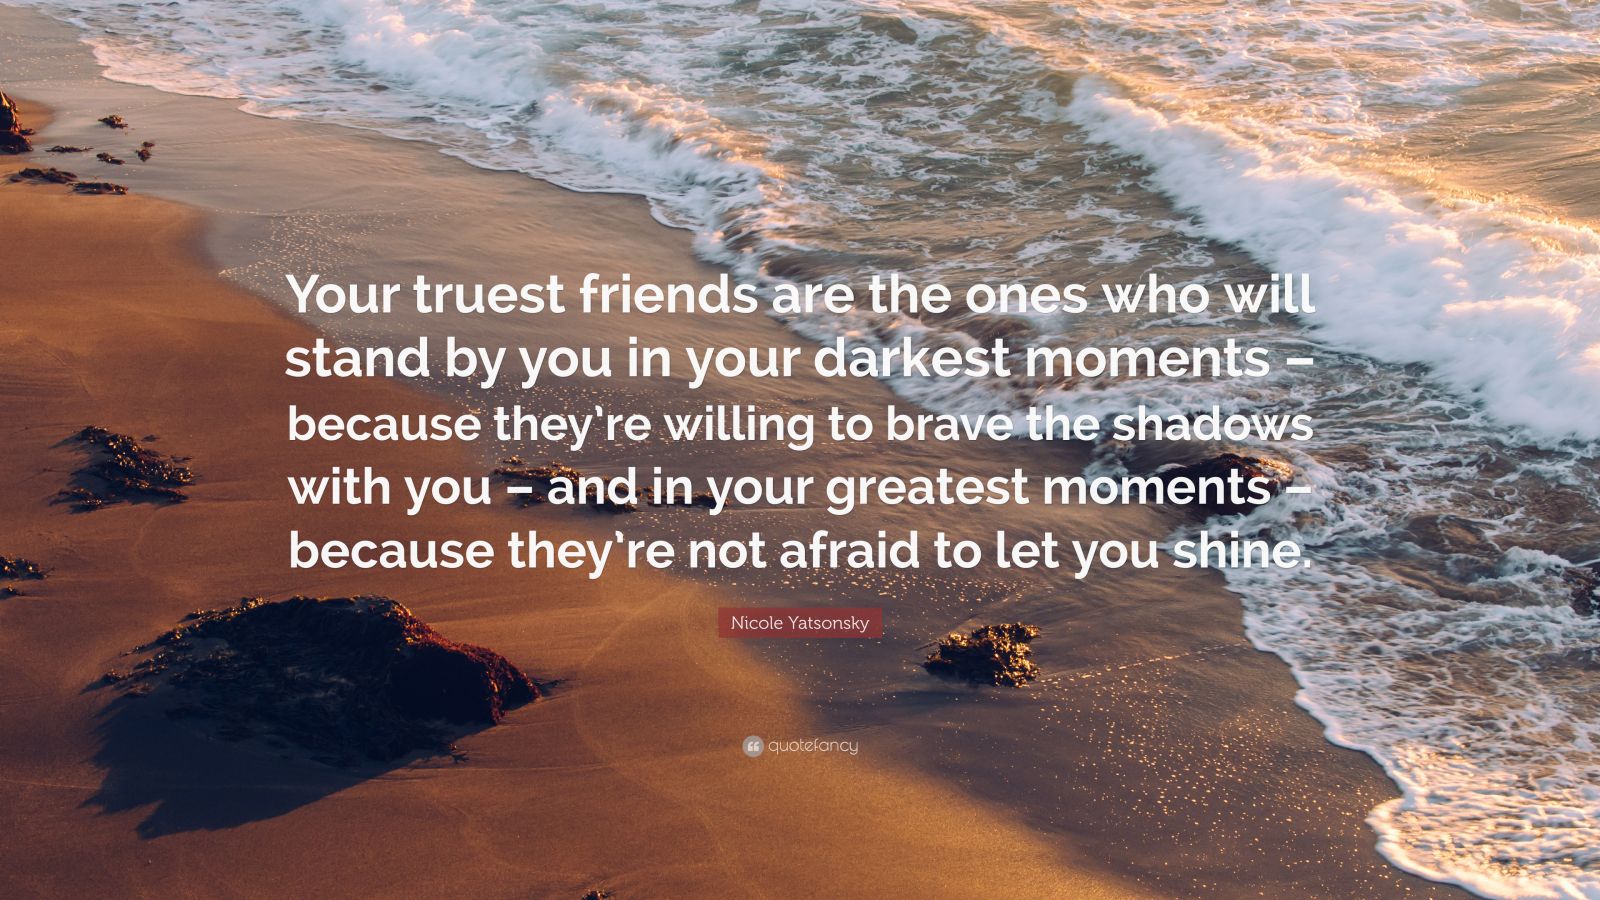 Nicole Yatsonsky Quote: “Your truest friends are the ones who will ...